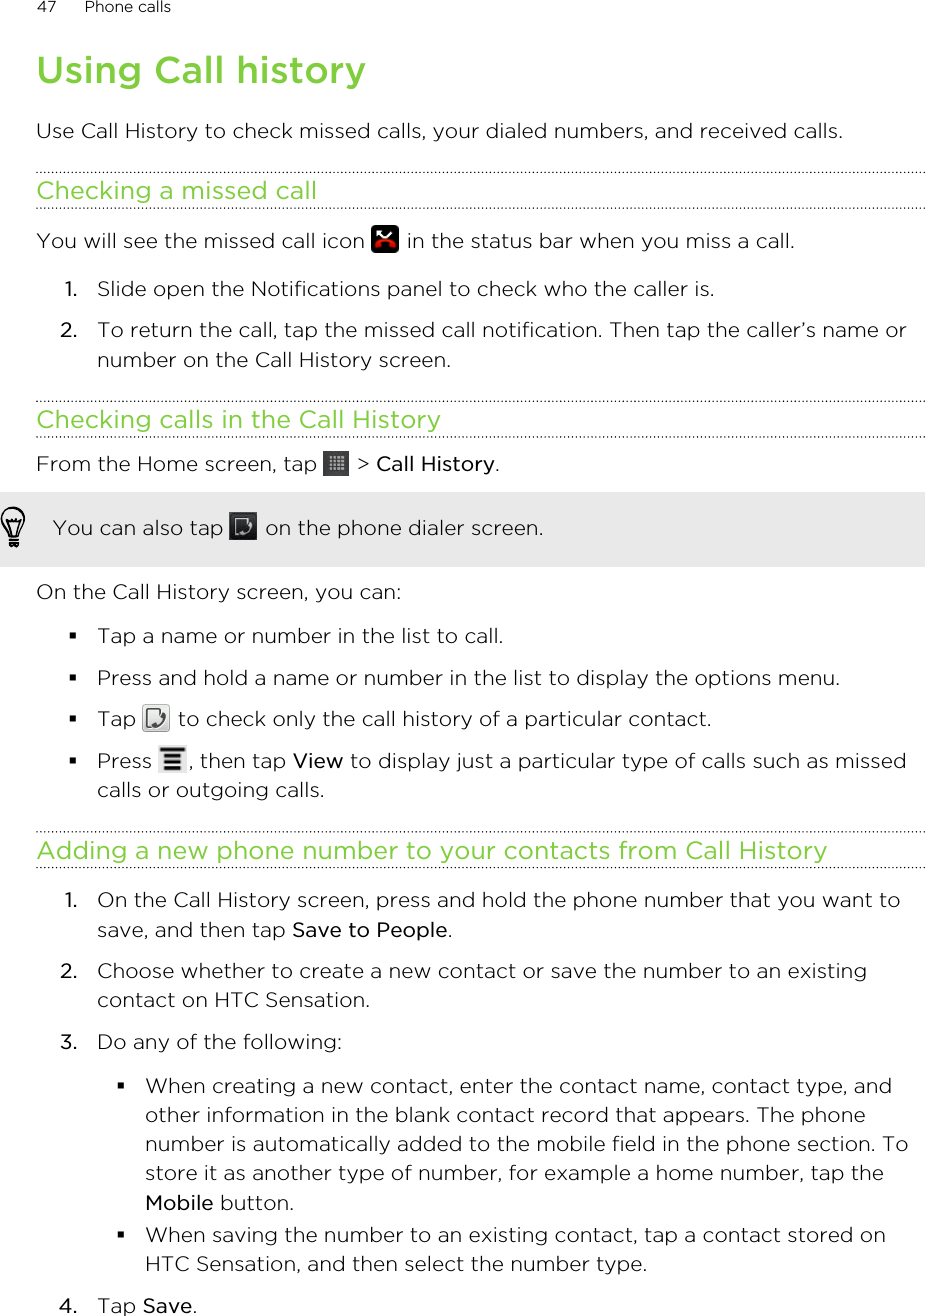 Using Call historyUse Call History to check missed calls, your dialed numbers, and received calls.Checking a missed callYou will see the missed call icon   in the status bar when you miss a call.1. Slide open the Notifications panel to check who the caller is.2. To return the call, tap the missed call notification. Then tap the caller’s name ornumber on the Call History screen.Checking calls in the Call HistoryFrom the Home screen, tap   &gt; Call History. You can also tap   on the phone dialer screen.On the Call History screen, you can:§Tap a name or number in the list to call.§Press and hold a name or number in the list to display the options menu.§Tap   to check only the call history of a particular contact.§Press  , then tap View to display just a particular type of calls such as missedcalls or outgoing calls.Adding a new phone number to your contacts from Call History1. On the Call History screen, press and hold the phone number that you want tosave, and then tap Save to People.2. Choose whether to create a new contact or save the number to an existingcontact on HTC Sensation.3. Do any of the following:§When creating a new contact, enter the contact name, contact type, andother information in the blank contact record that appears. The phonenumber is automatically added to the mobile field in the phone section. Tostore it as another type of number, for example a home number, tap theMobile button.§When saving the number to an existing contact, tap a contact stored onHTC Sensation, and then select the number type.4. Tap Save.47 Phone calls